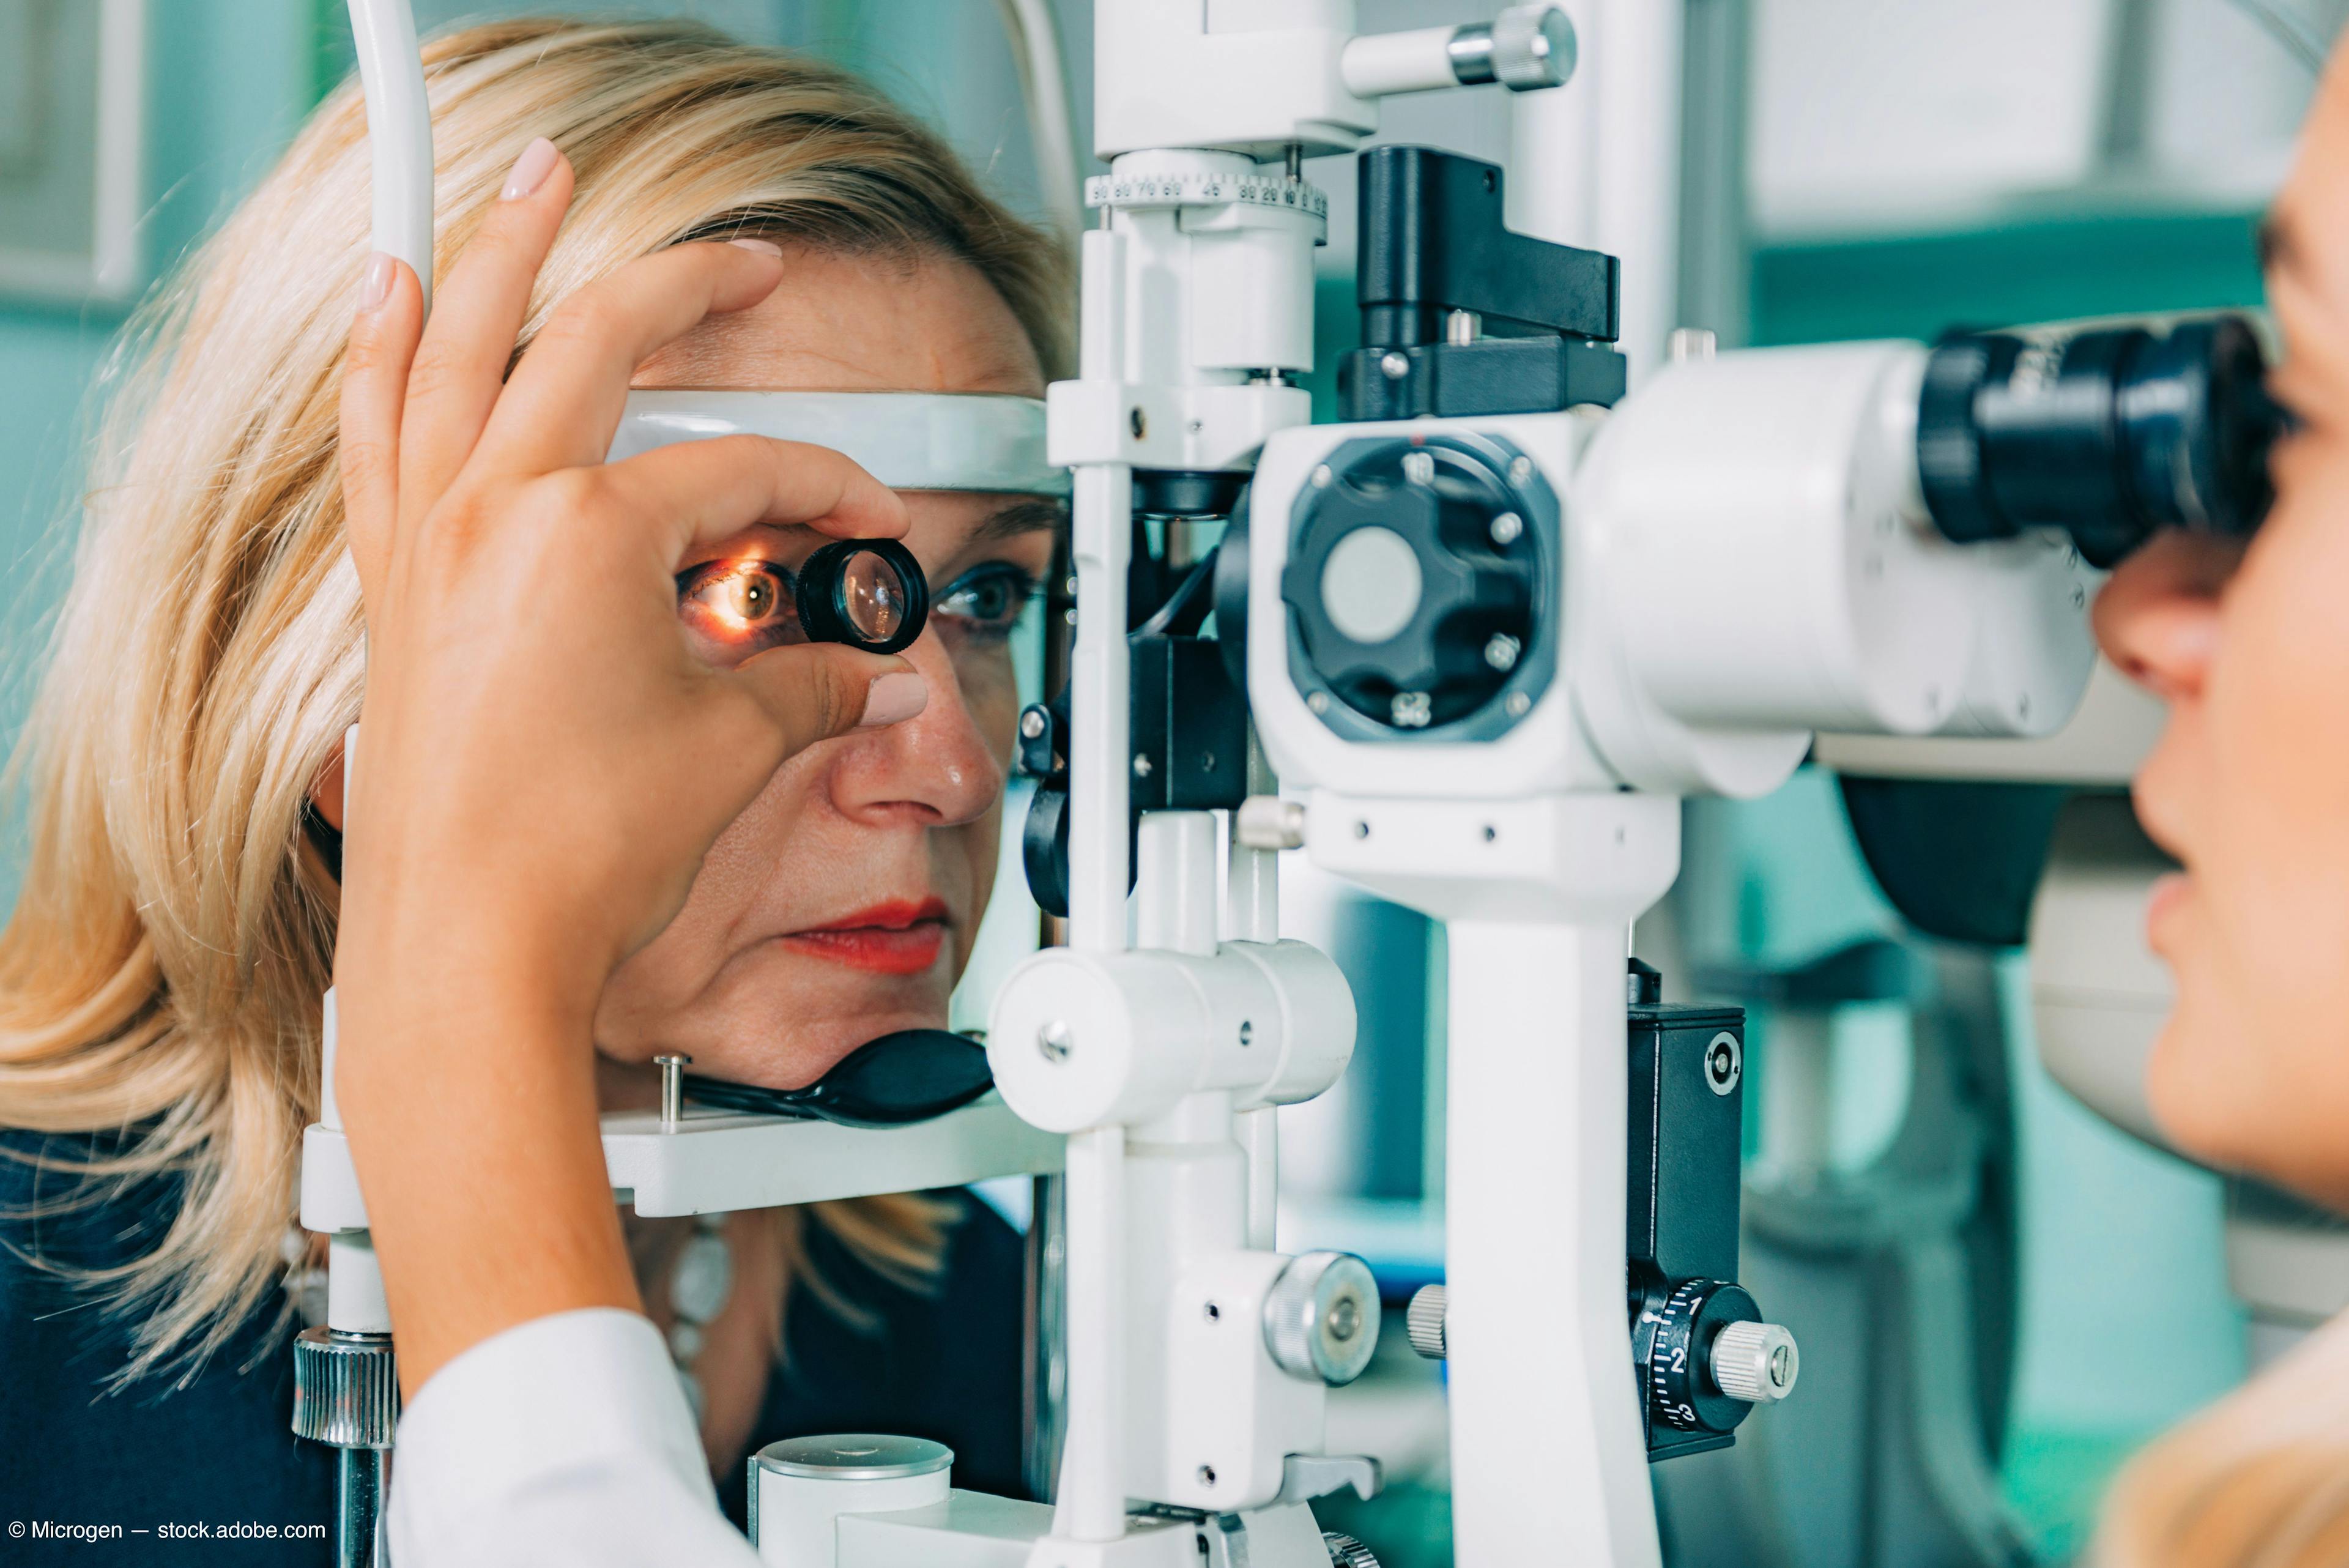 Checking own work postoperatively offers value to ophthalmologists